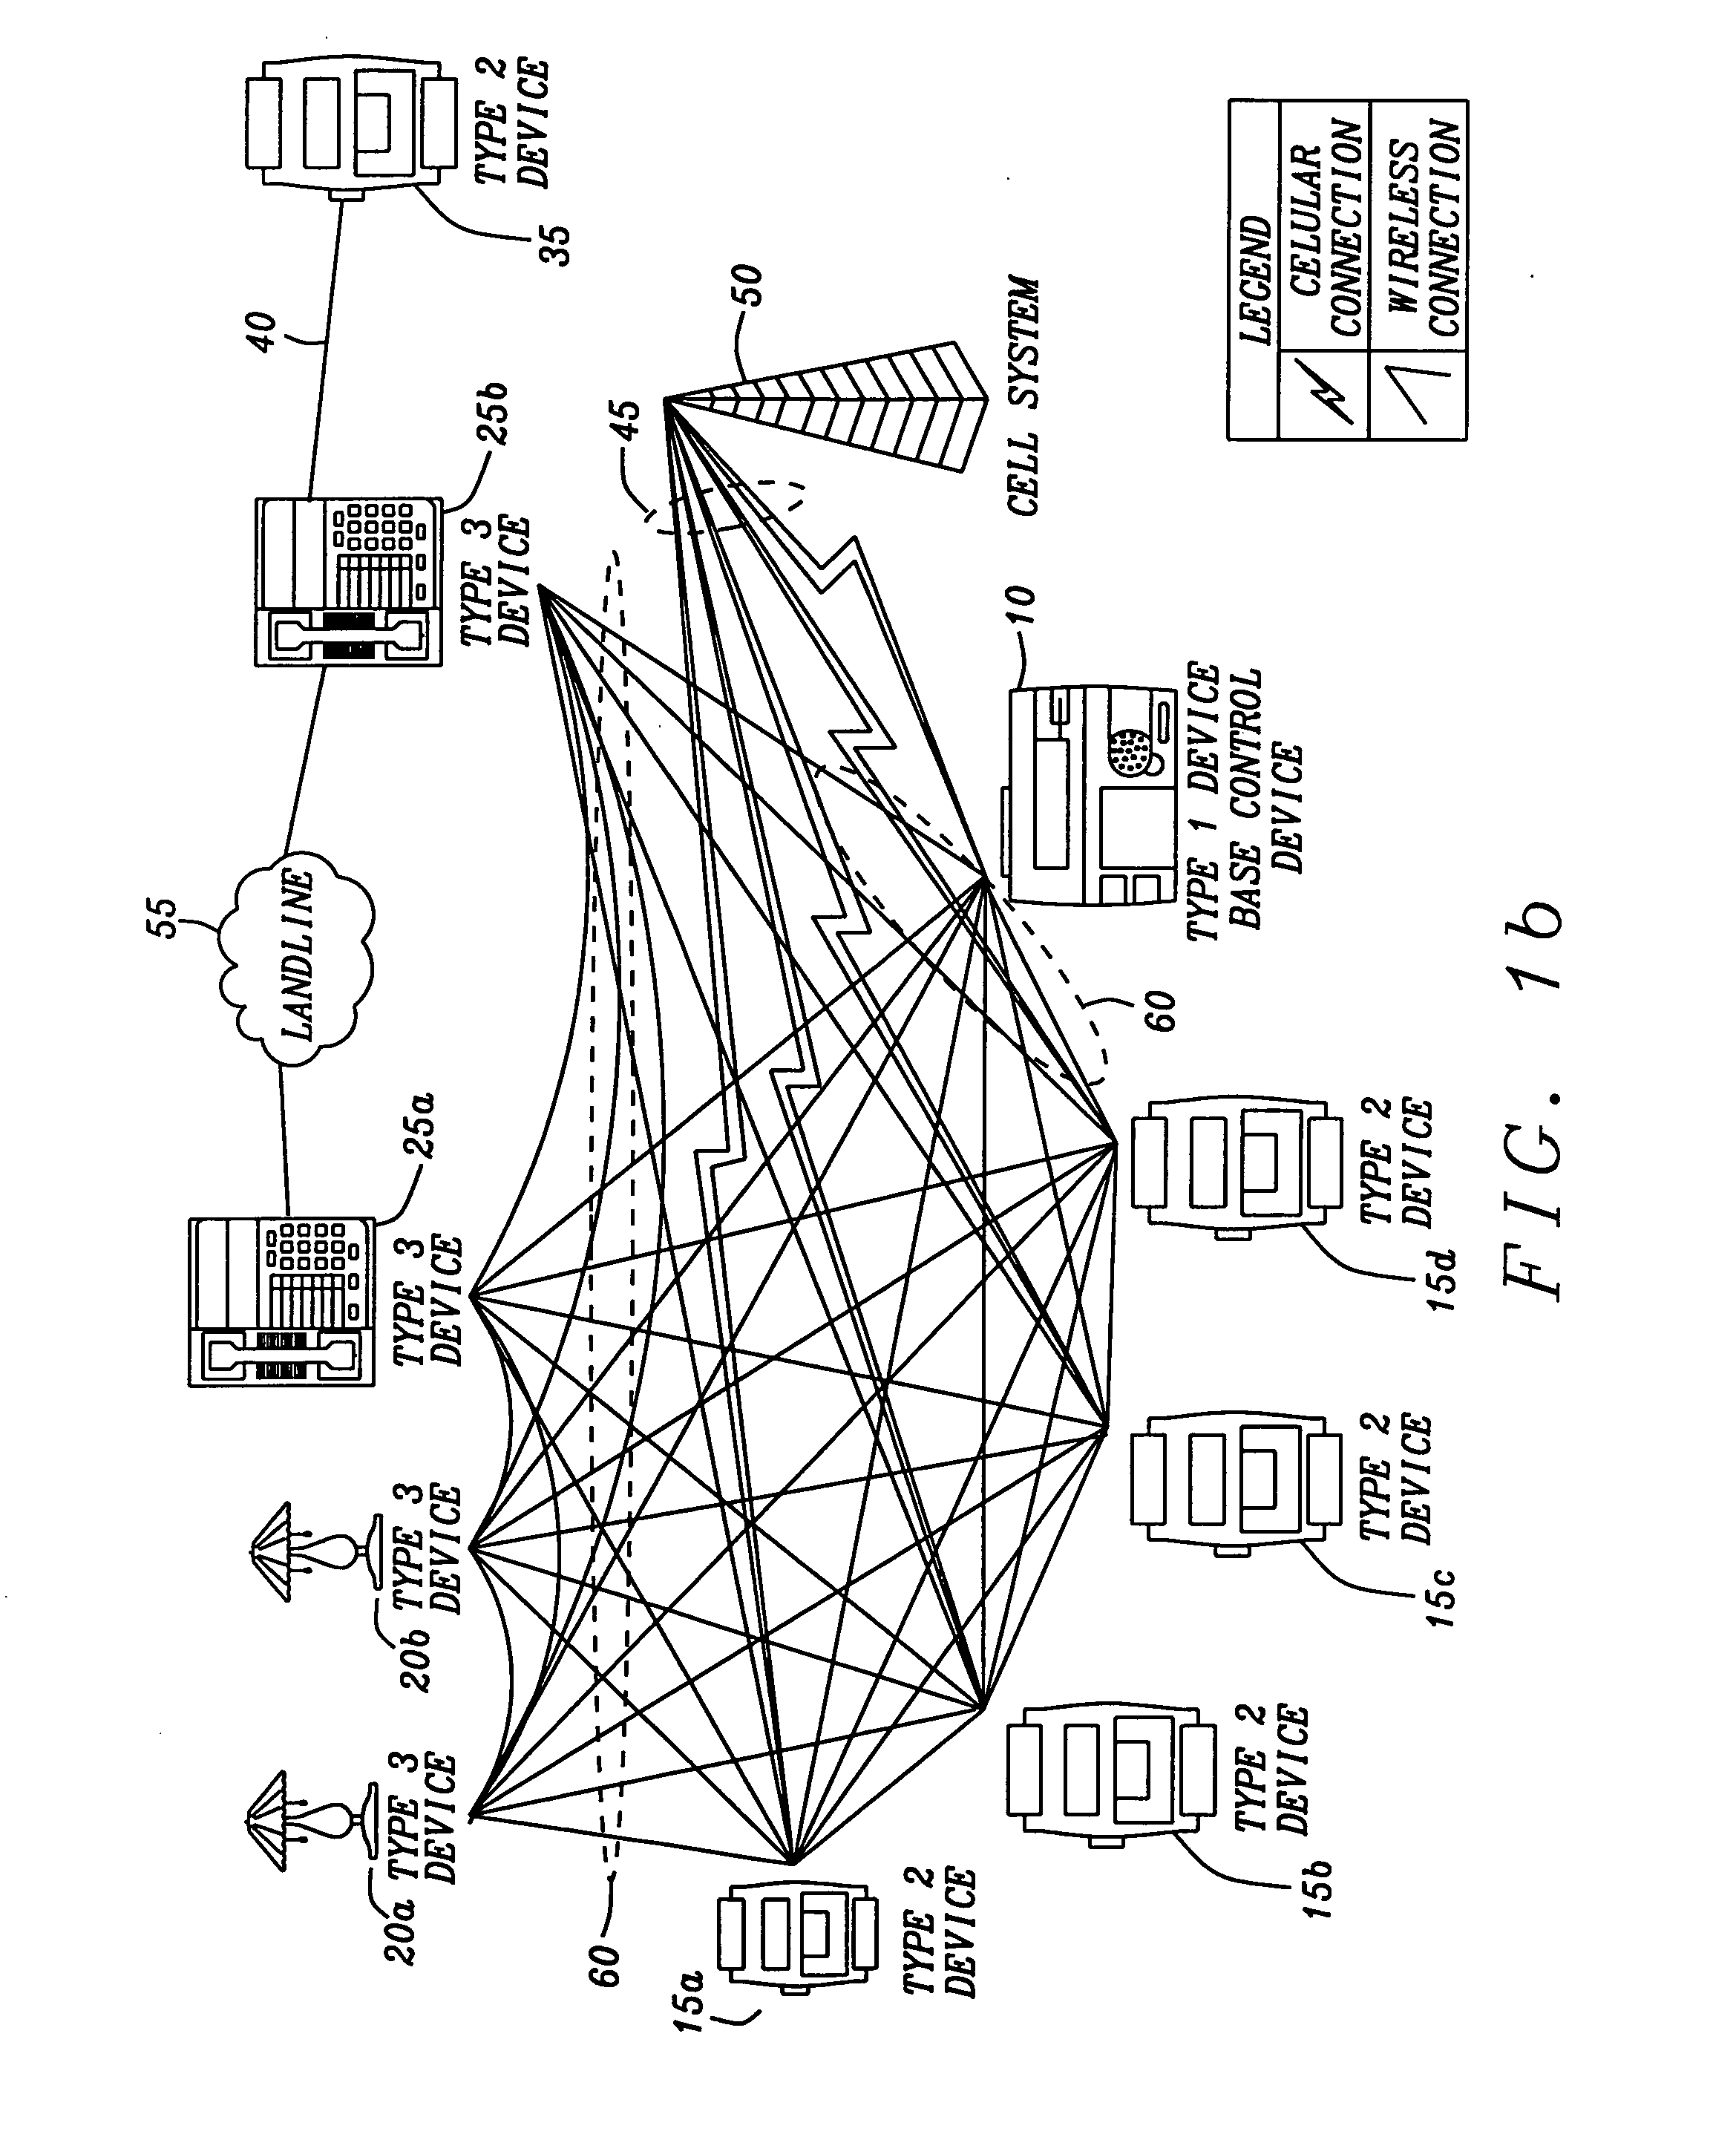 Wireless system protocols for power-efficient implementation of star and mesh wireless networks with local and wide-area coverage